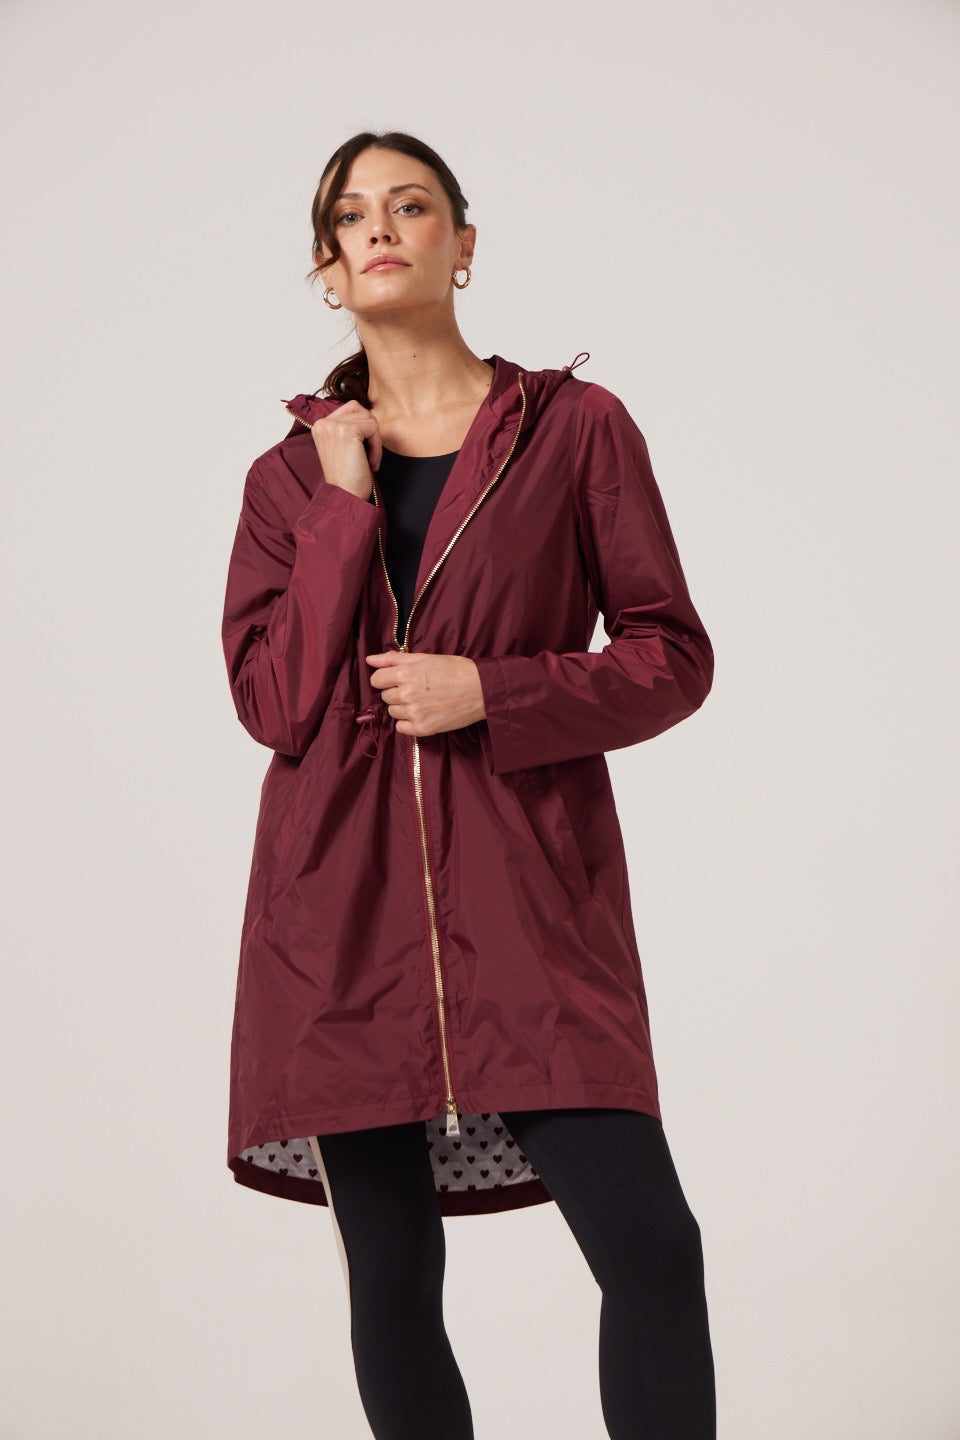 Maroon Raincoat with a heart lining